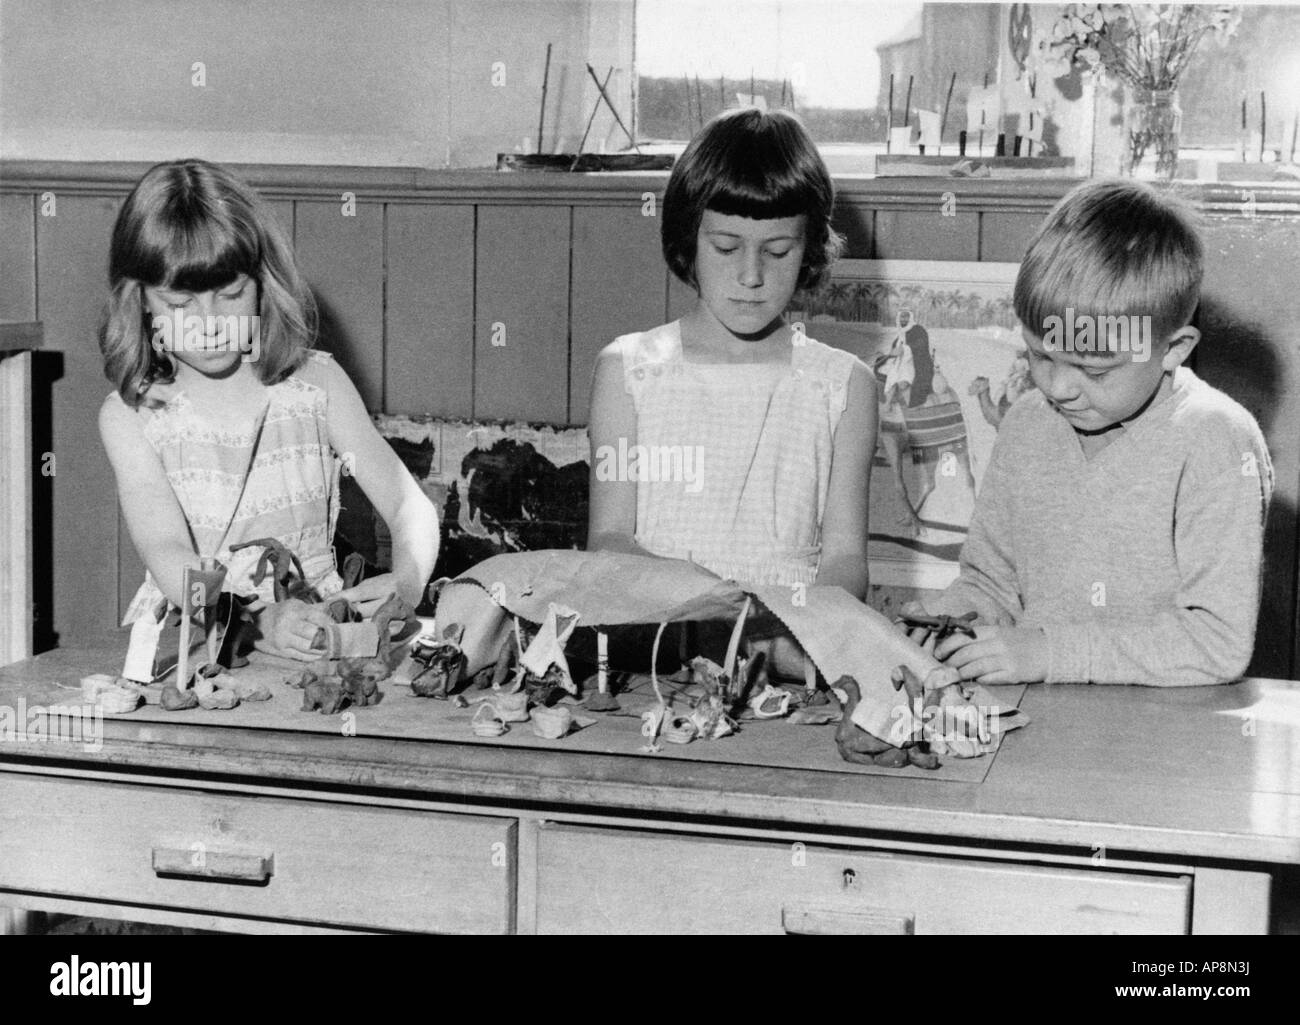 OLD BLACK AND WHITE FAMILY PHOTOGRAPH SNAP SHOT OF THREE YOUNG CHILDREN MAKING CLAY MODELS AT SCHOOL CIRCA 1950 Stock Photo